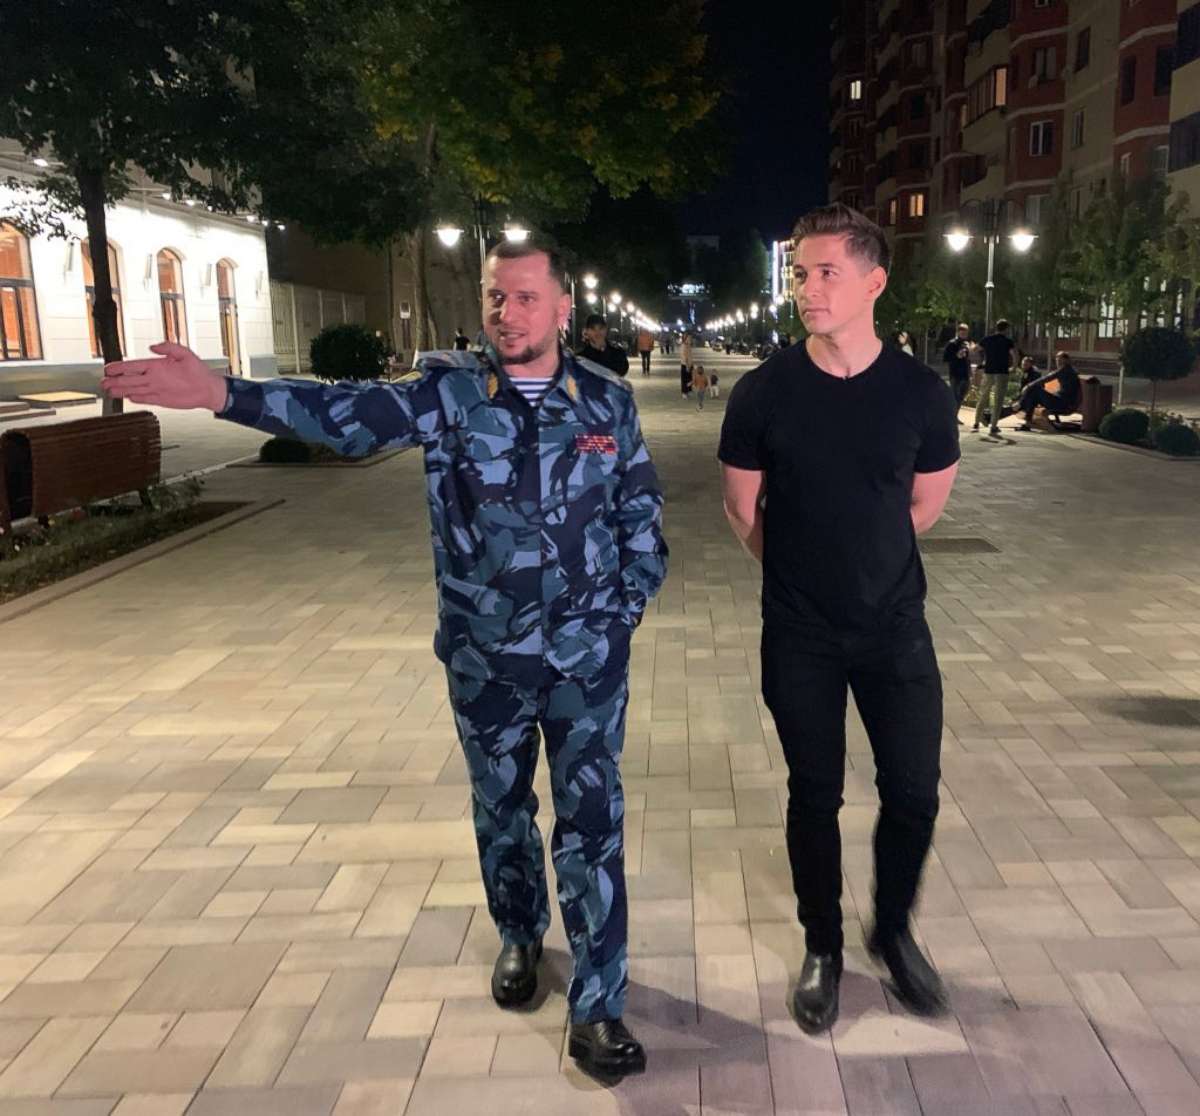 PHOTO: ABC News' James Longman spoke with Apti Alaudinov, the head of police in Chechnya, a Russian republic that has allegedly purged LGBTQ people over the last two years. 